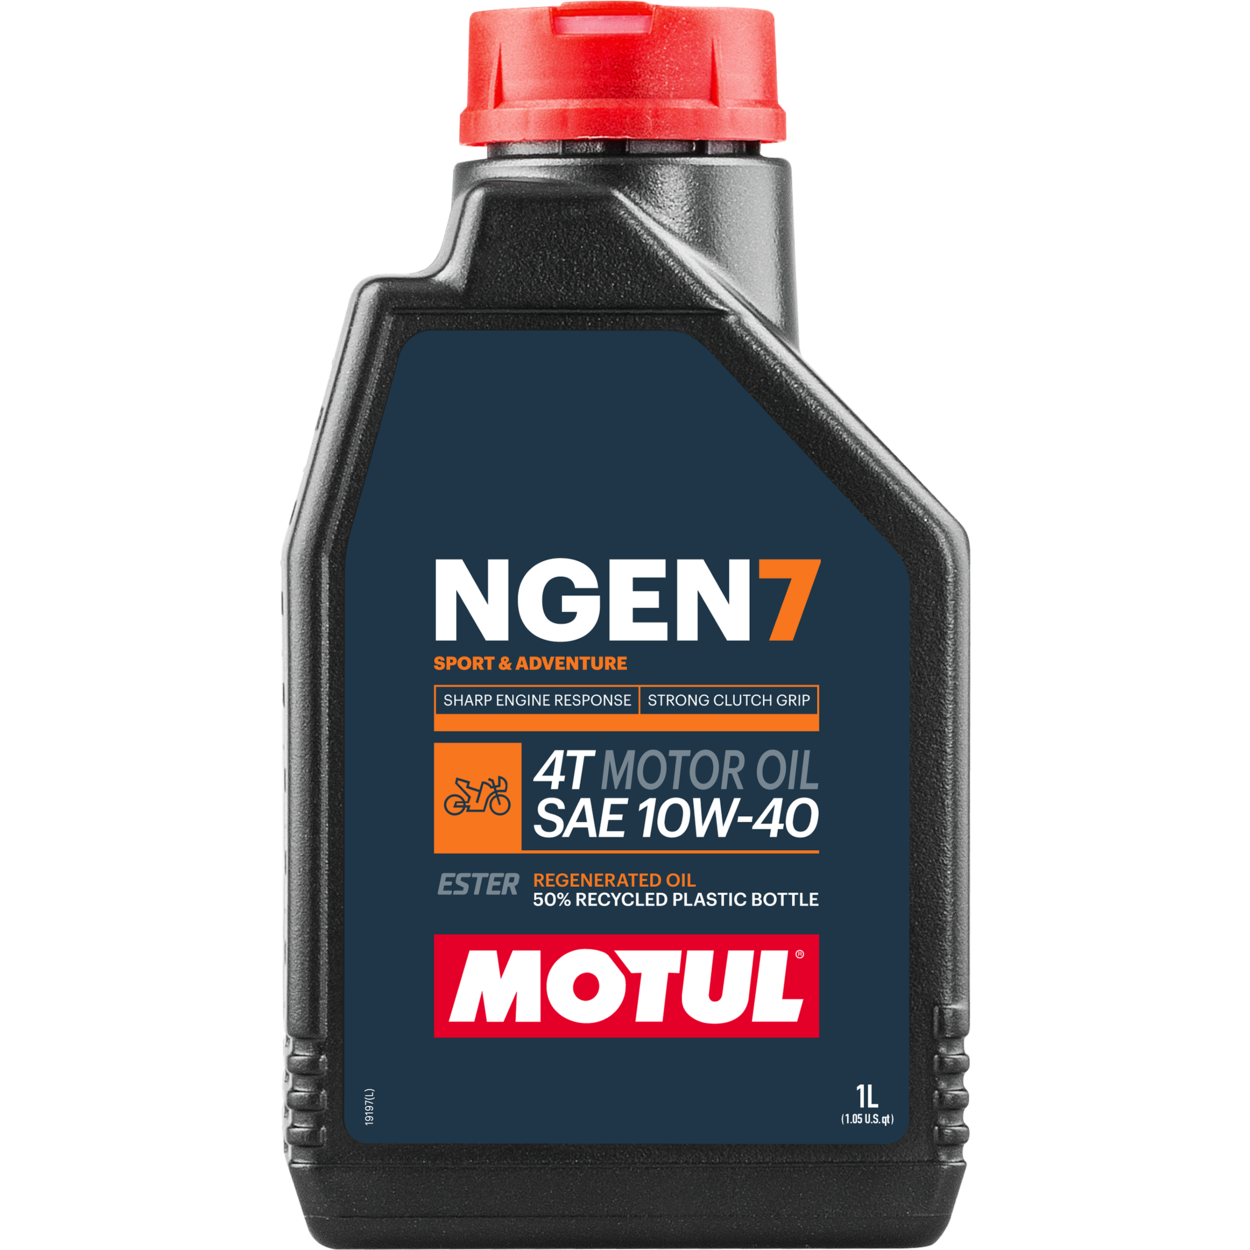 111835-1 MOTUL NGEN 7 10W-40 4T is a best-in-class 4-stroke motor oil based on a combination of finest virgin base oils and additives blended with synthetic esters and high quality regenerated oils.